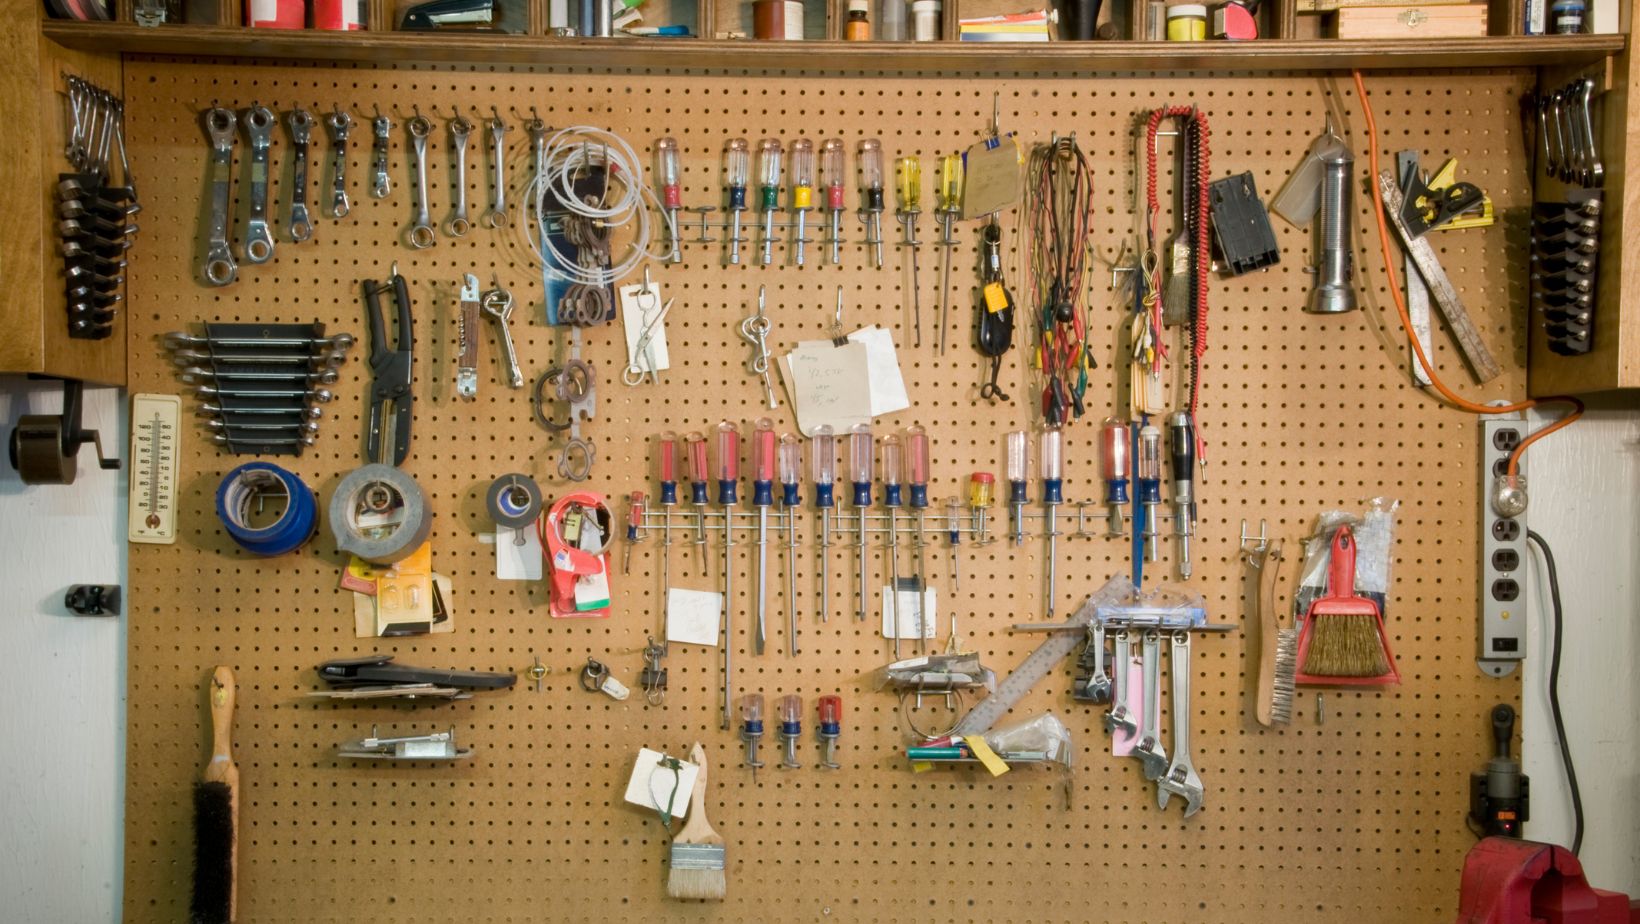 A wall of hanging tools